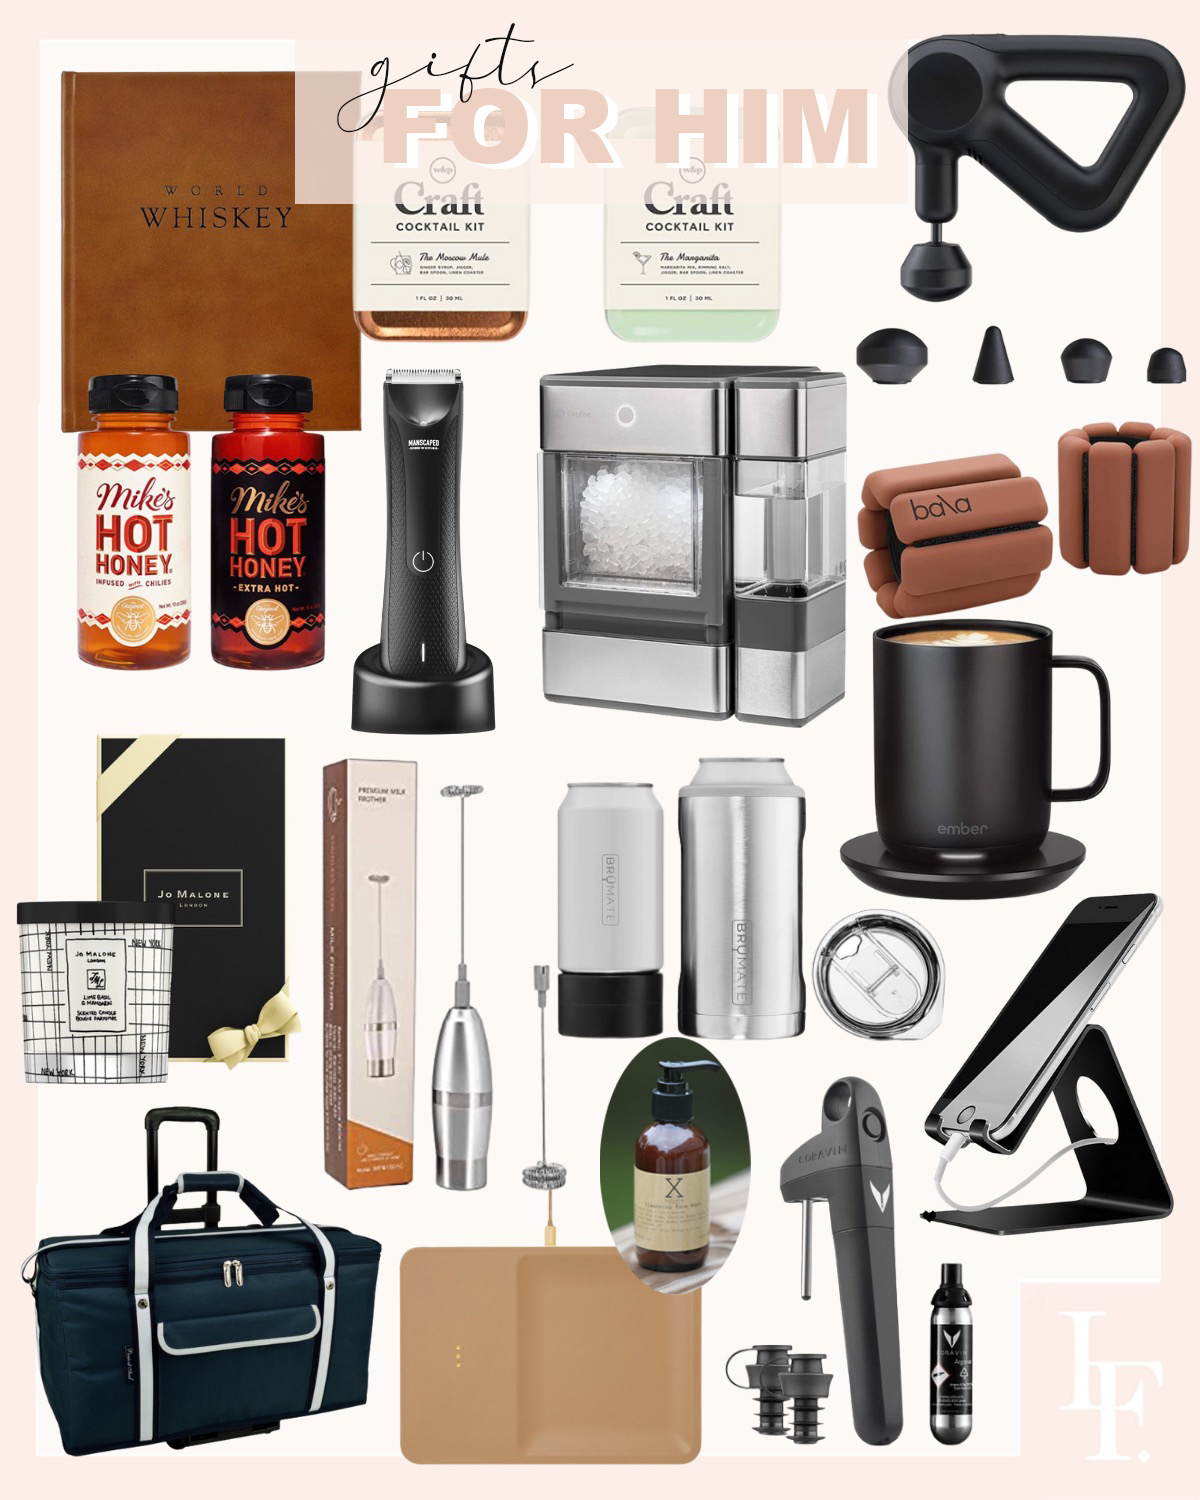 Gift guide 2021, the best gifts for him. Manscaped, Mike’s hot honey, nugget ice maker. By Lombard and Fifth, Veronica Levy.